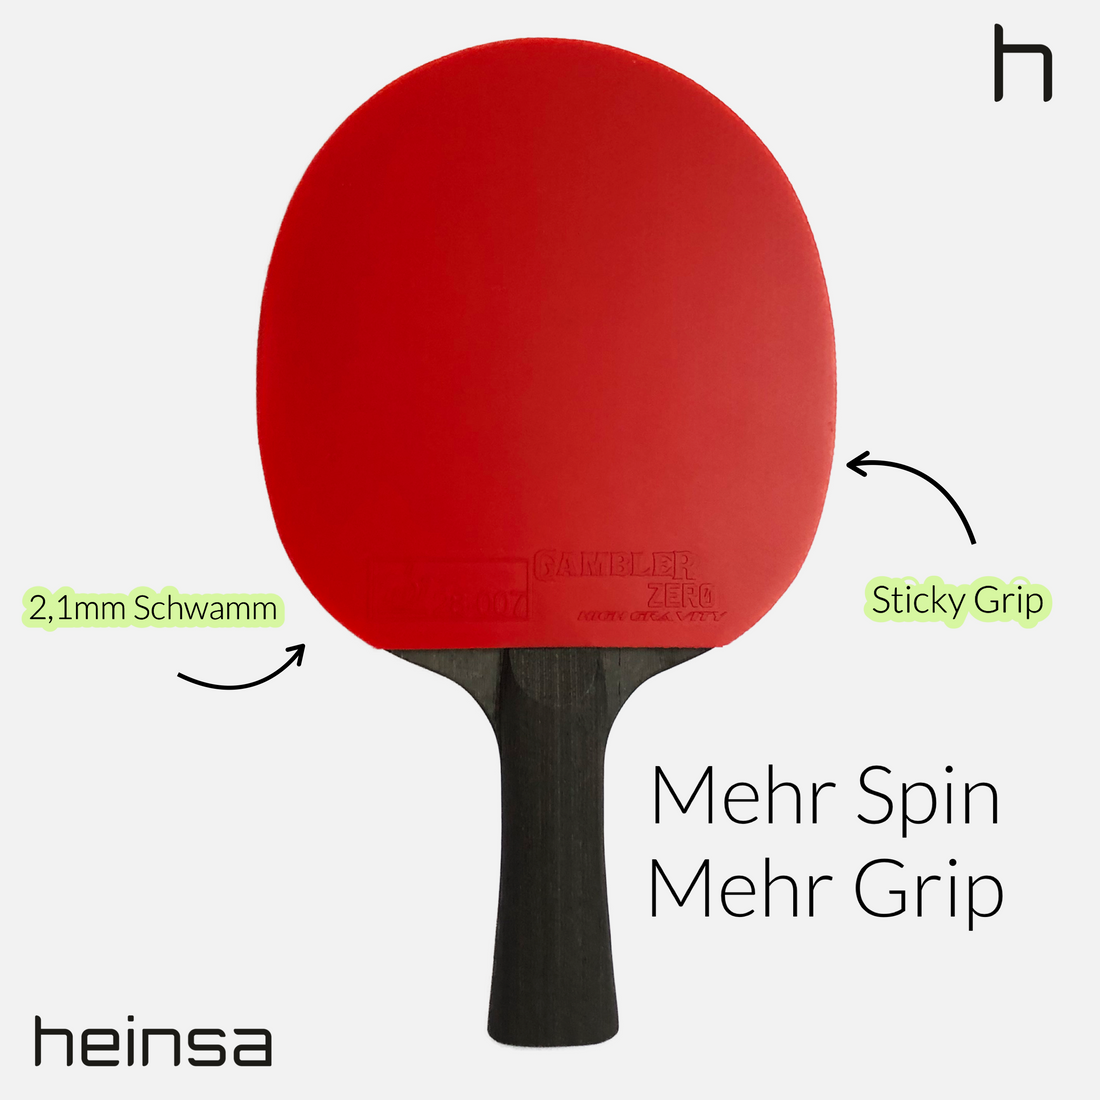 heinsa "black edition" professional table tennis bat made of carbon and light walnut wood